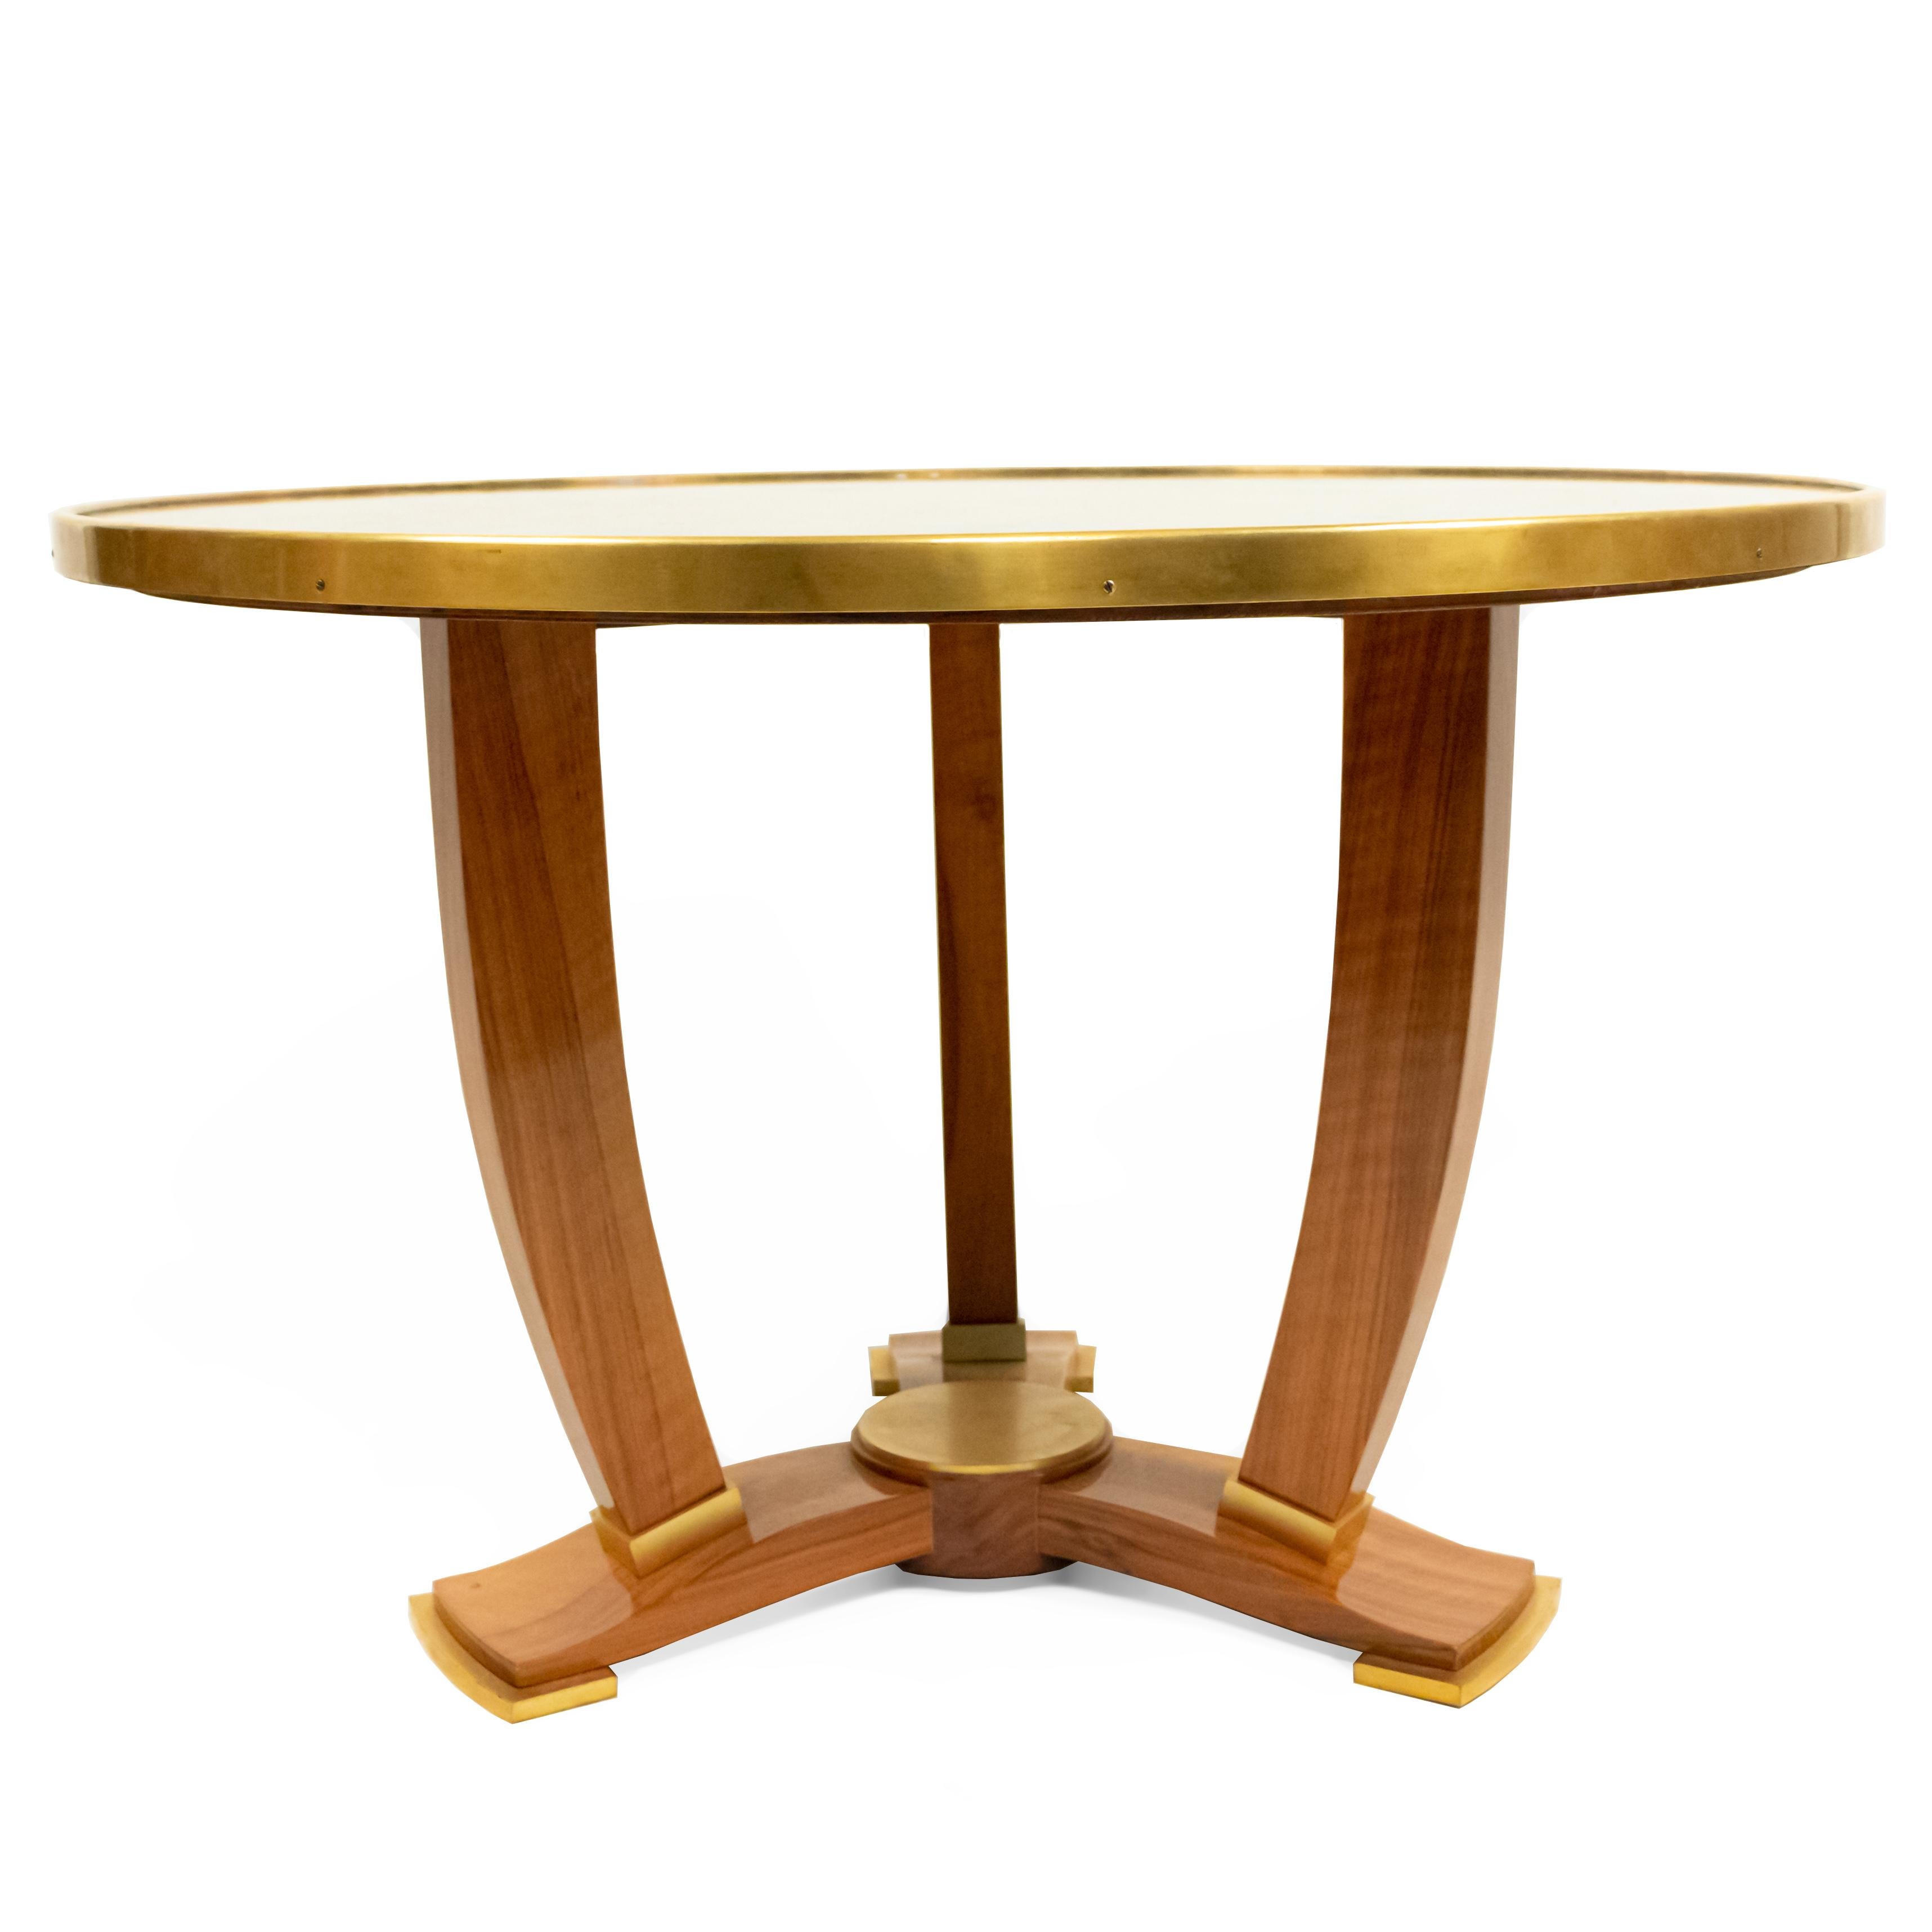 French midcentury round gilt metal coffee/side table with an inset verre églomisé top having a vegetable design resting on three curved feet ending in gilt bronze sabots (Jules Leleu ca. 1950).